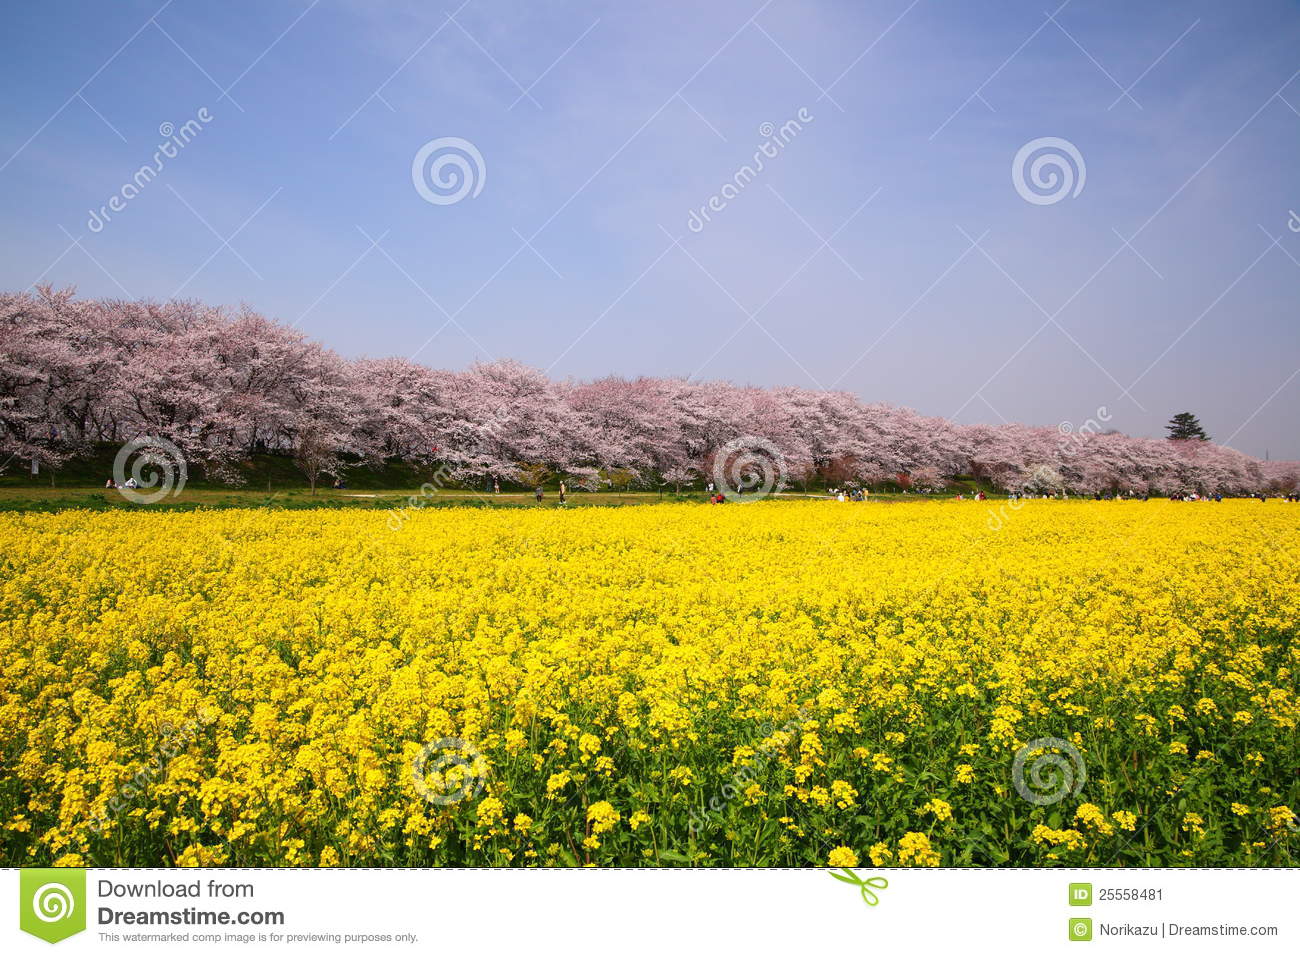 Rape Blossoms And Cherry Tree Stock Image.